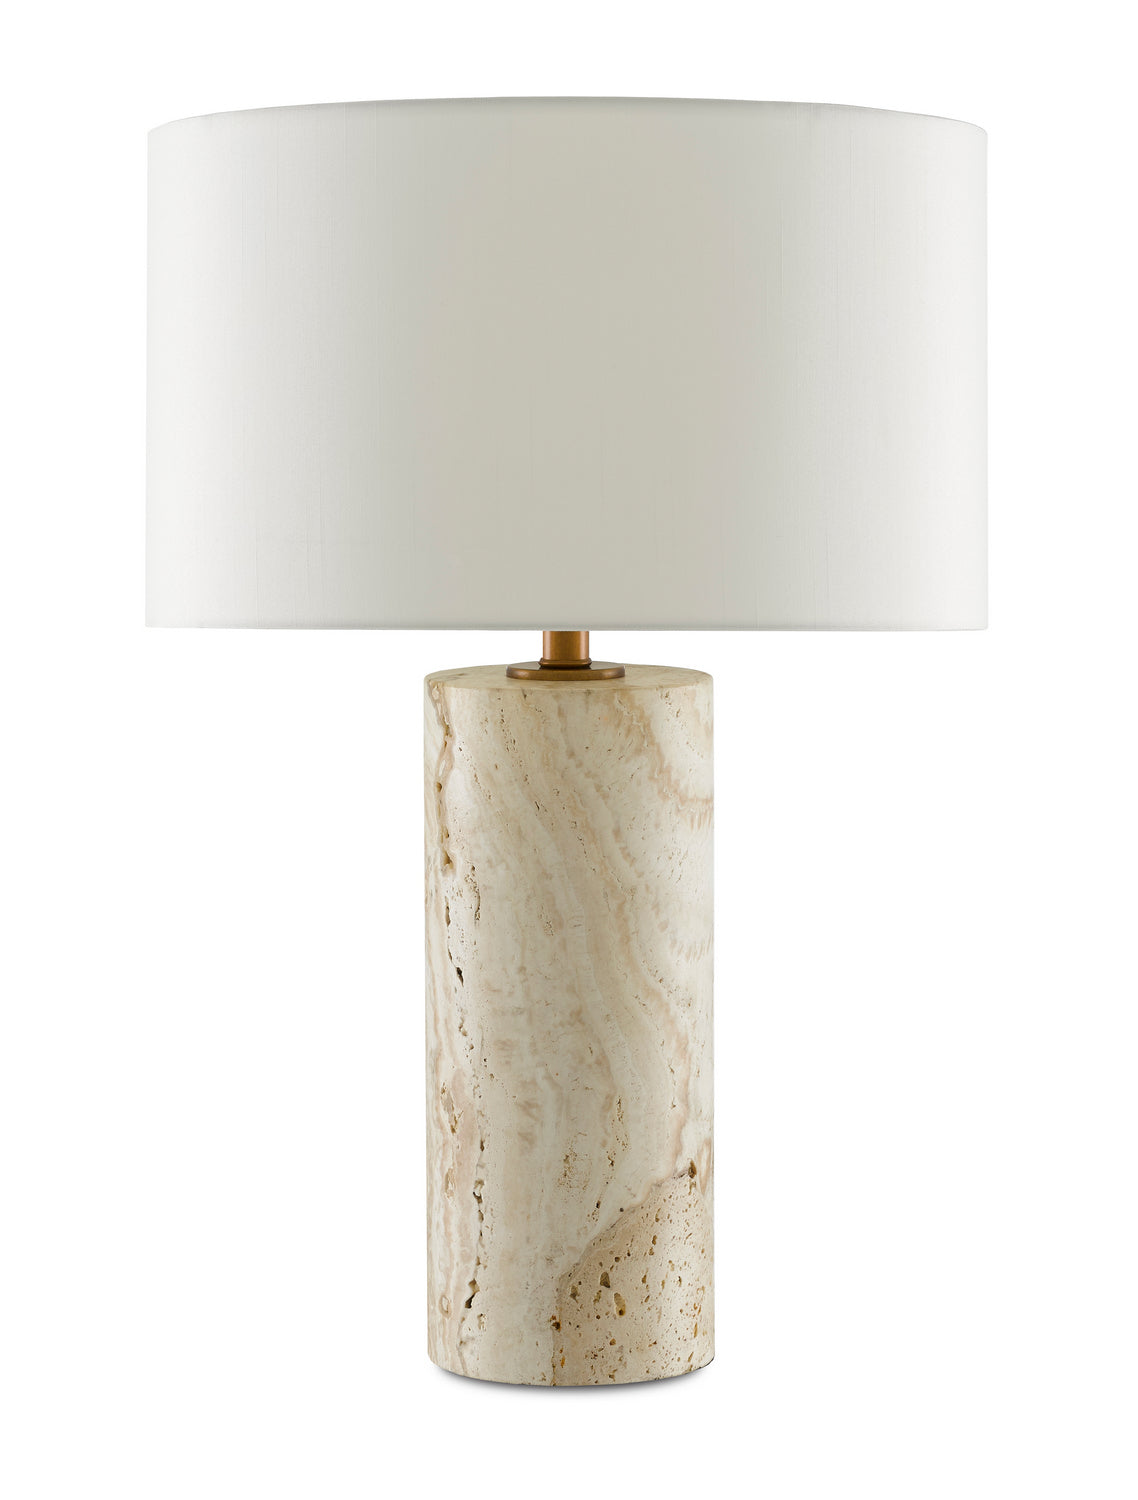 One Light Table Lamp from the Vespera collection in Antique Brass finish